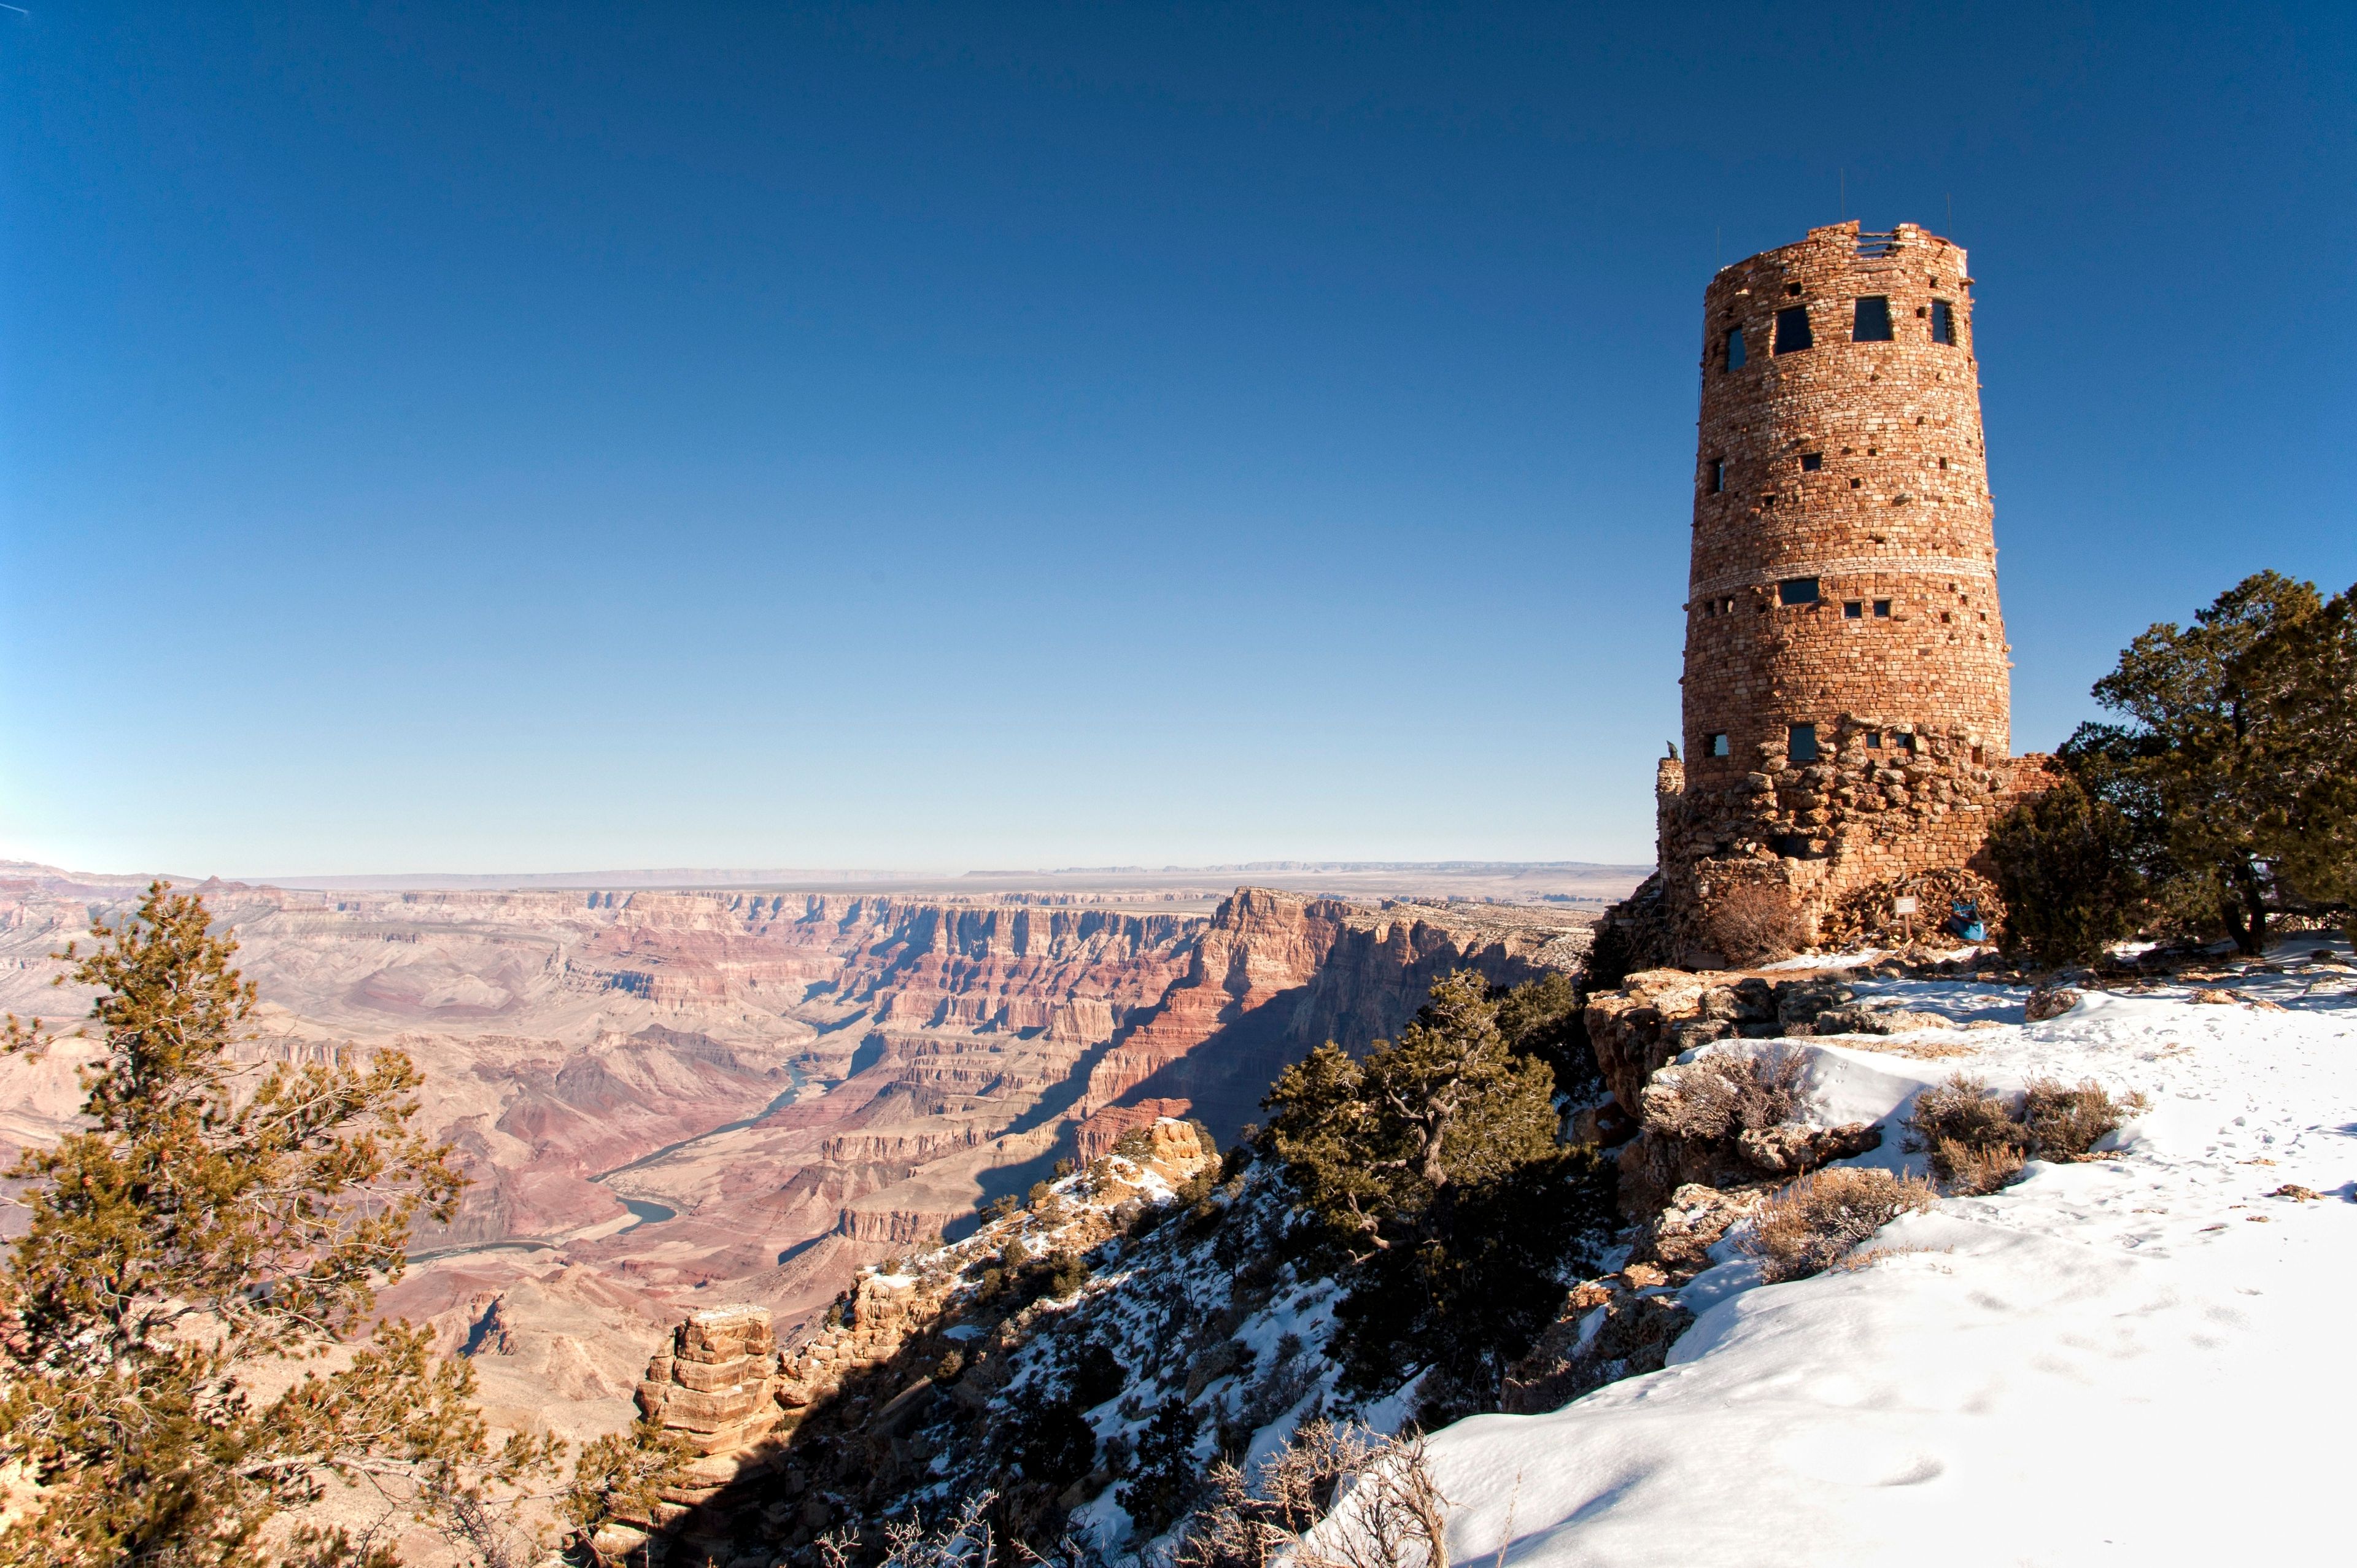 A watchtower looking over the Grand Canyon in Arizona.